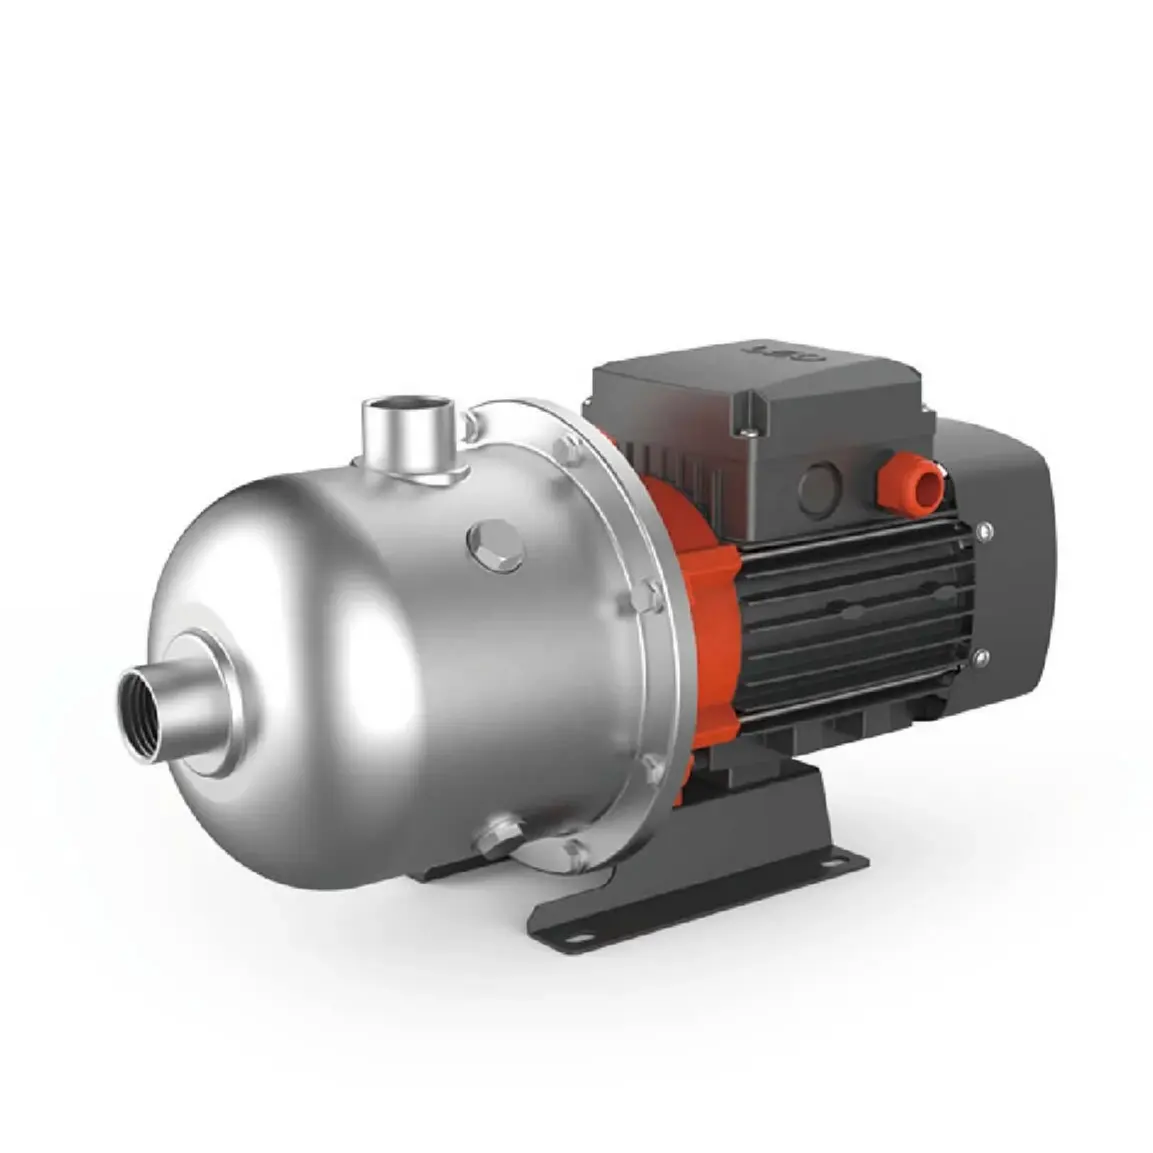 LEO EDH Series Stainless Steel Horizontal Multistage Pump With Stainless Steel Pump Body